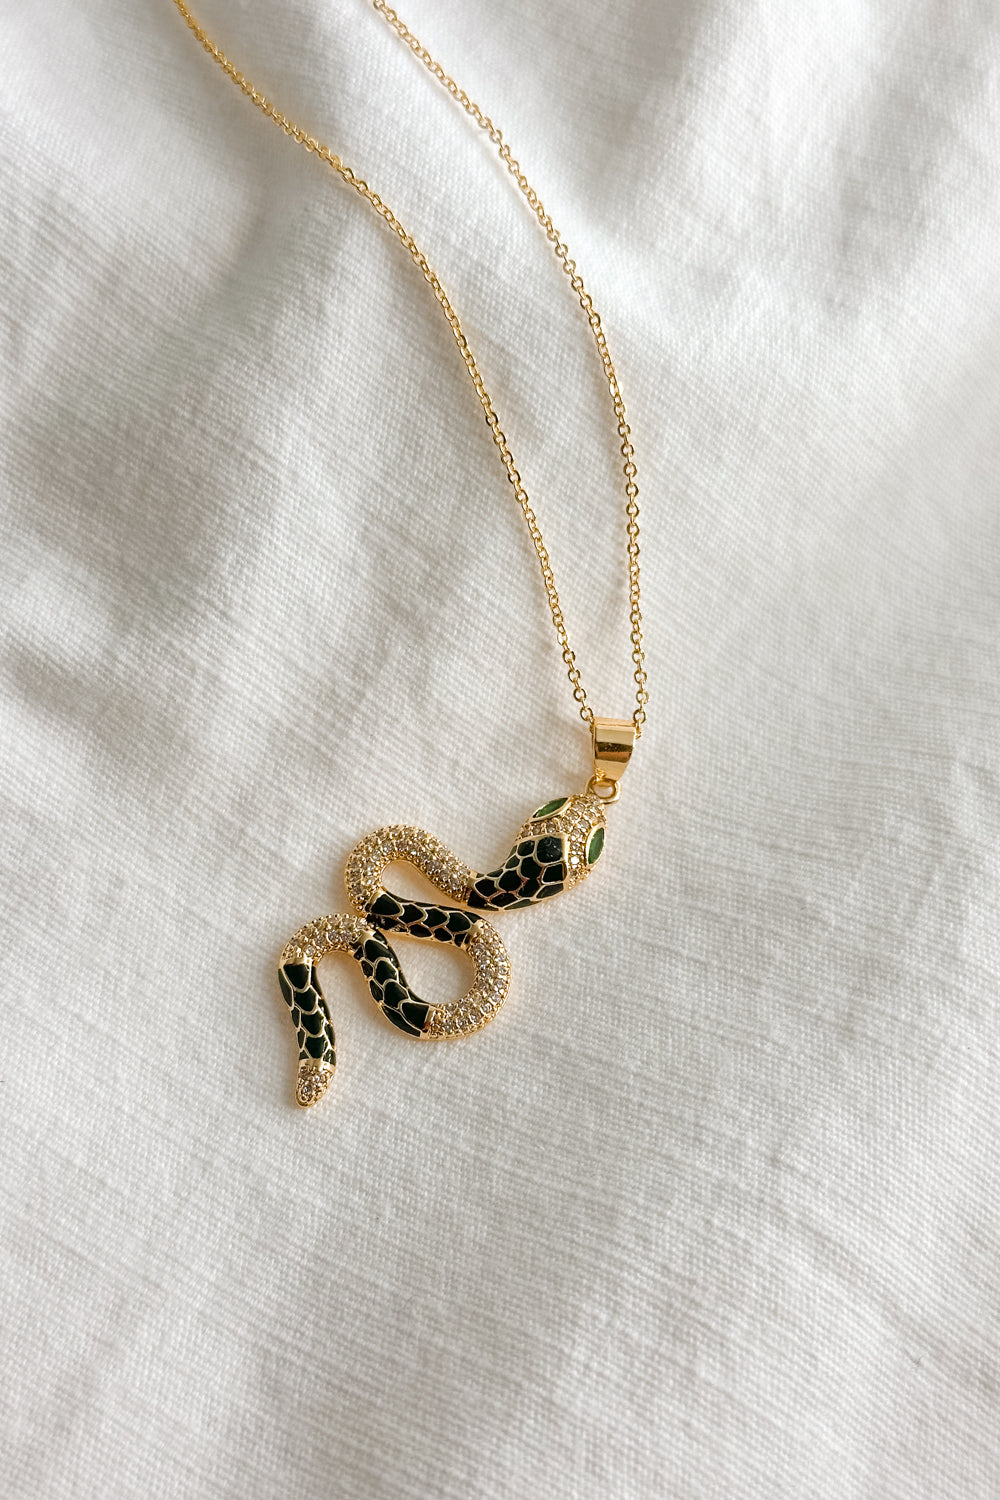 Flat lay view of the Lucia Black & Gold Snake Necklace which features gold chain link single layer with a black and gold snake medallion